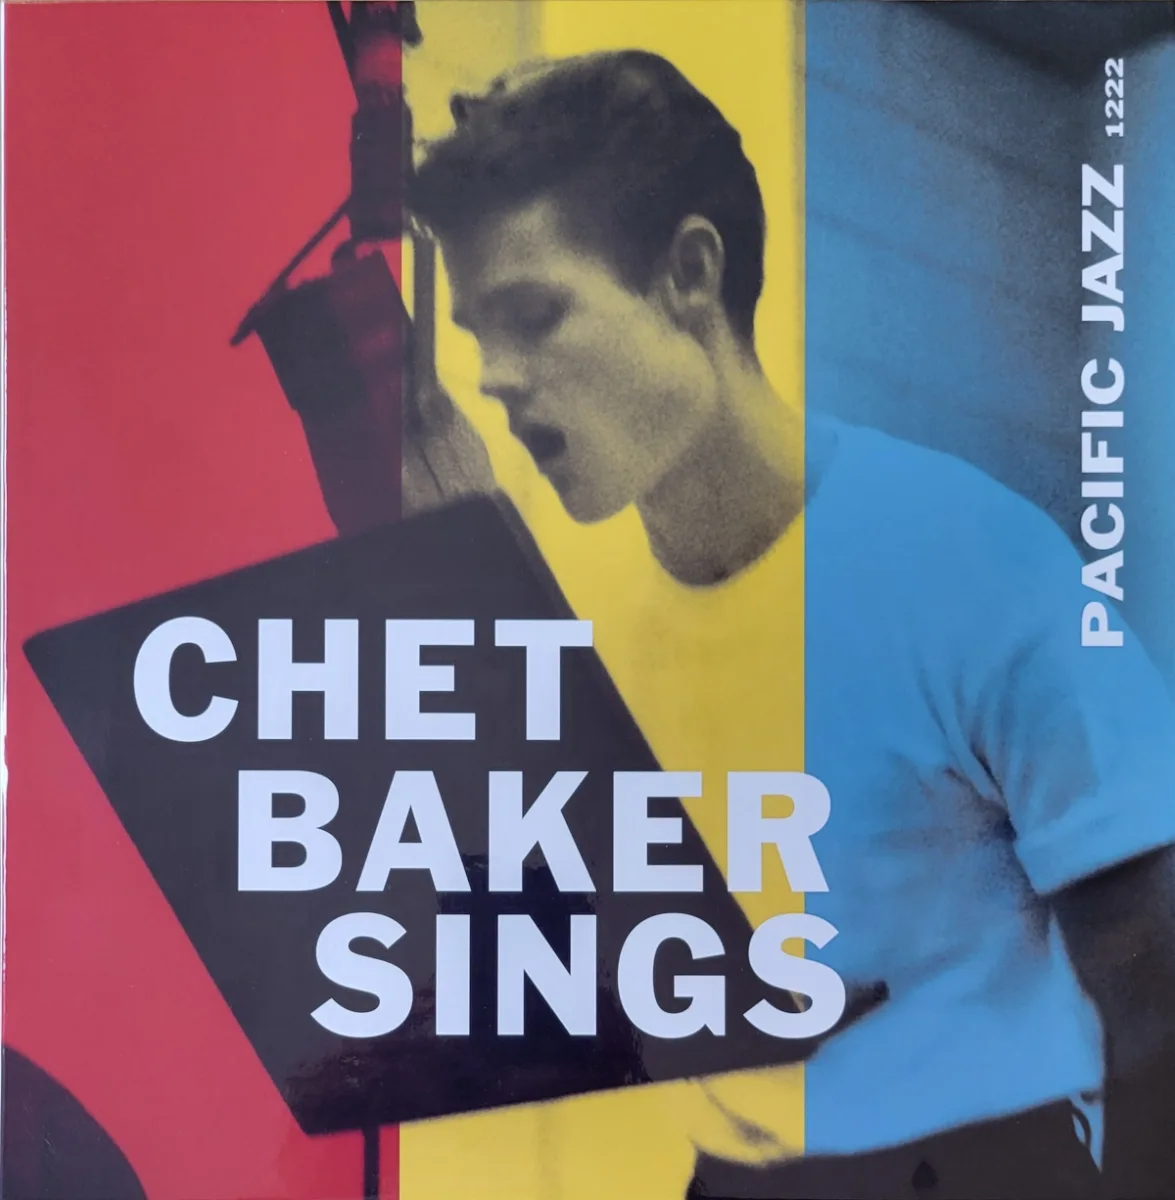 Album cover: Photo of Chet Baker at a microphone, singing